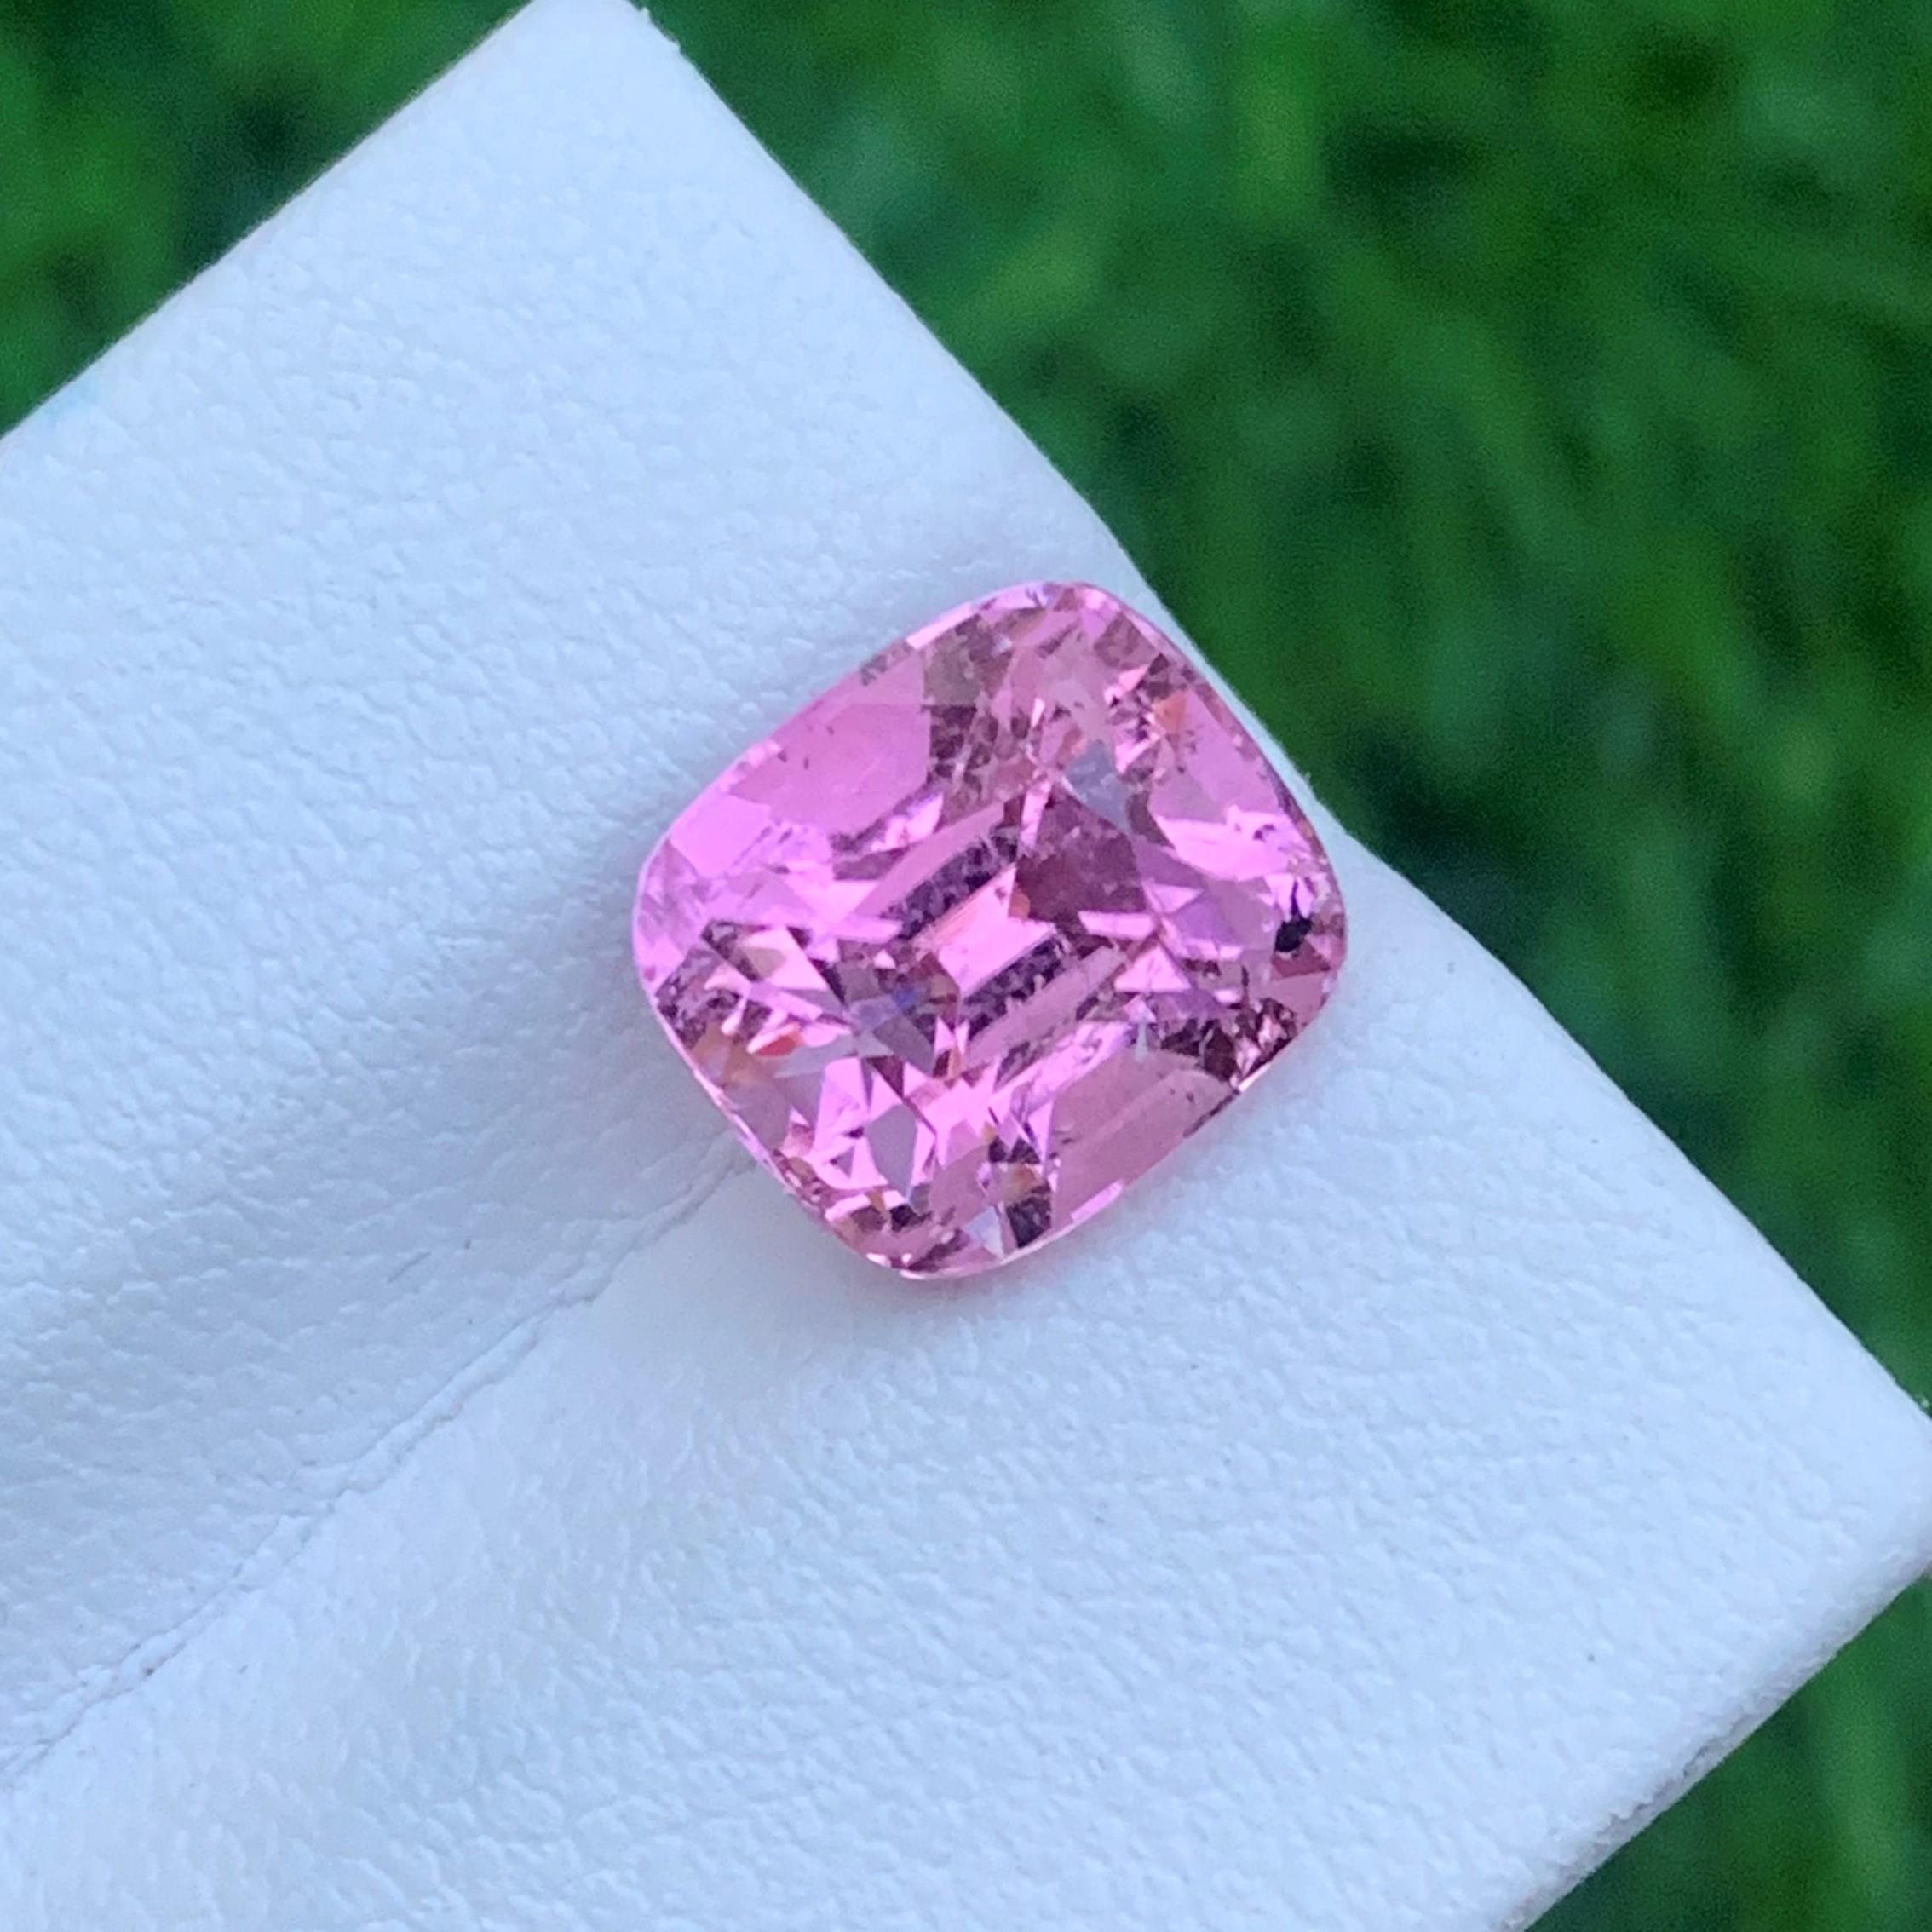 Faceted Tourmaline
Weight: 4.70 Carats
Dimension: 9.8x8.8x8 Mm
Origin: Kunar Afghanistan
Color: Pink
Shape: Cushion
Clarity: Eye Clean
Certificate: On Demand

With a rating between 7 and 7.5 on the Mohs scale of mineral hardness, tourmaline jewelry